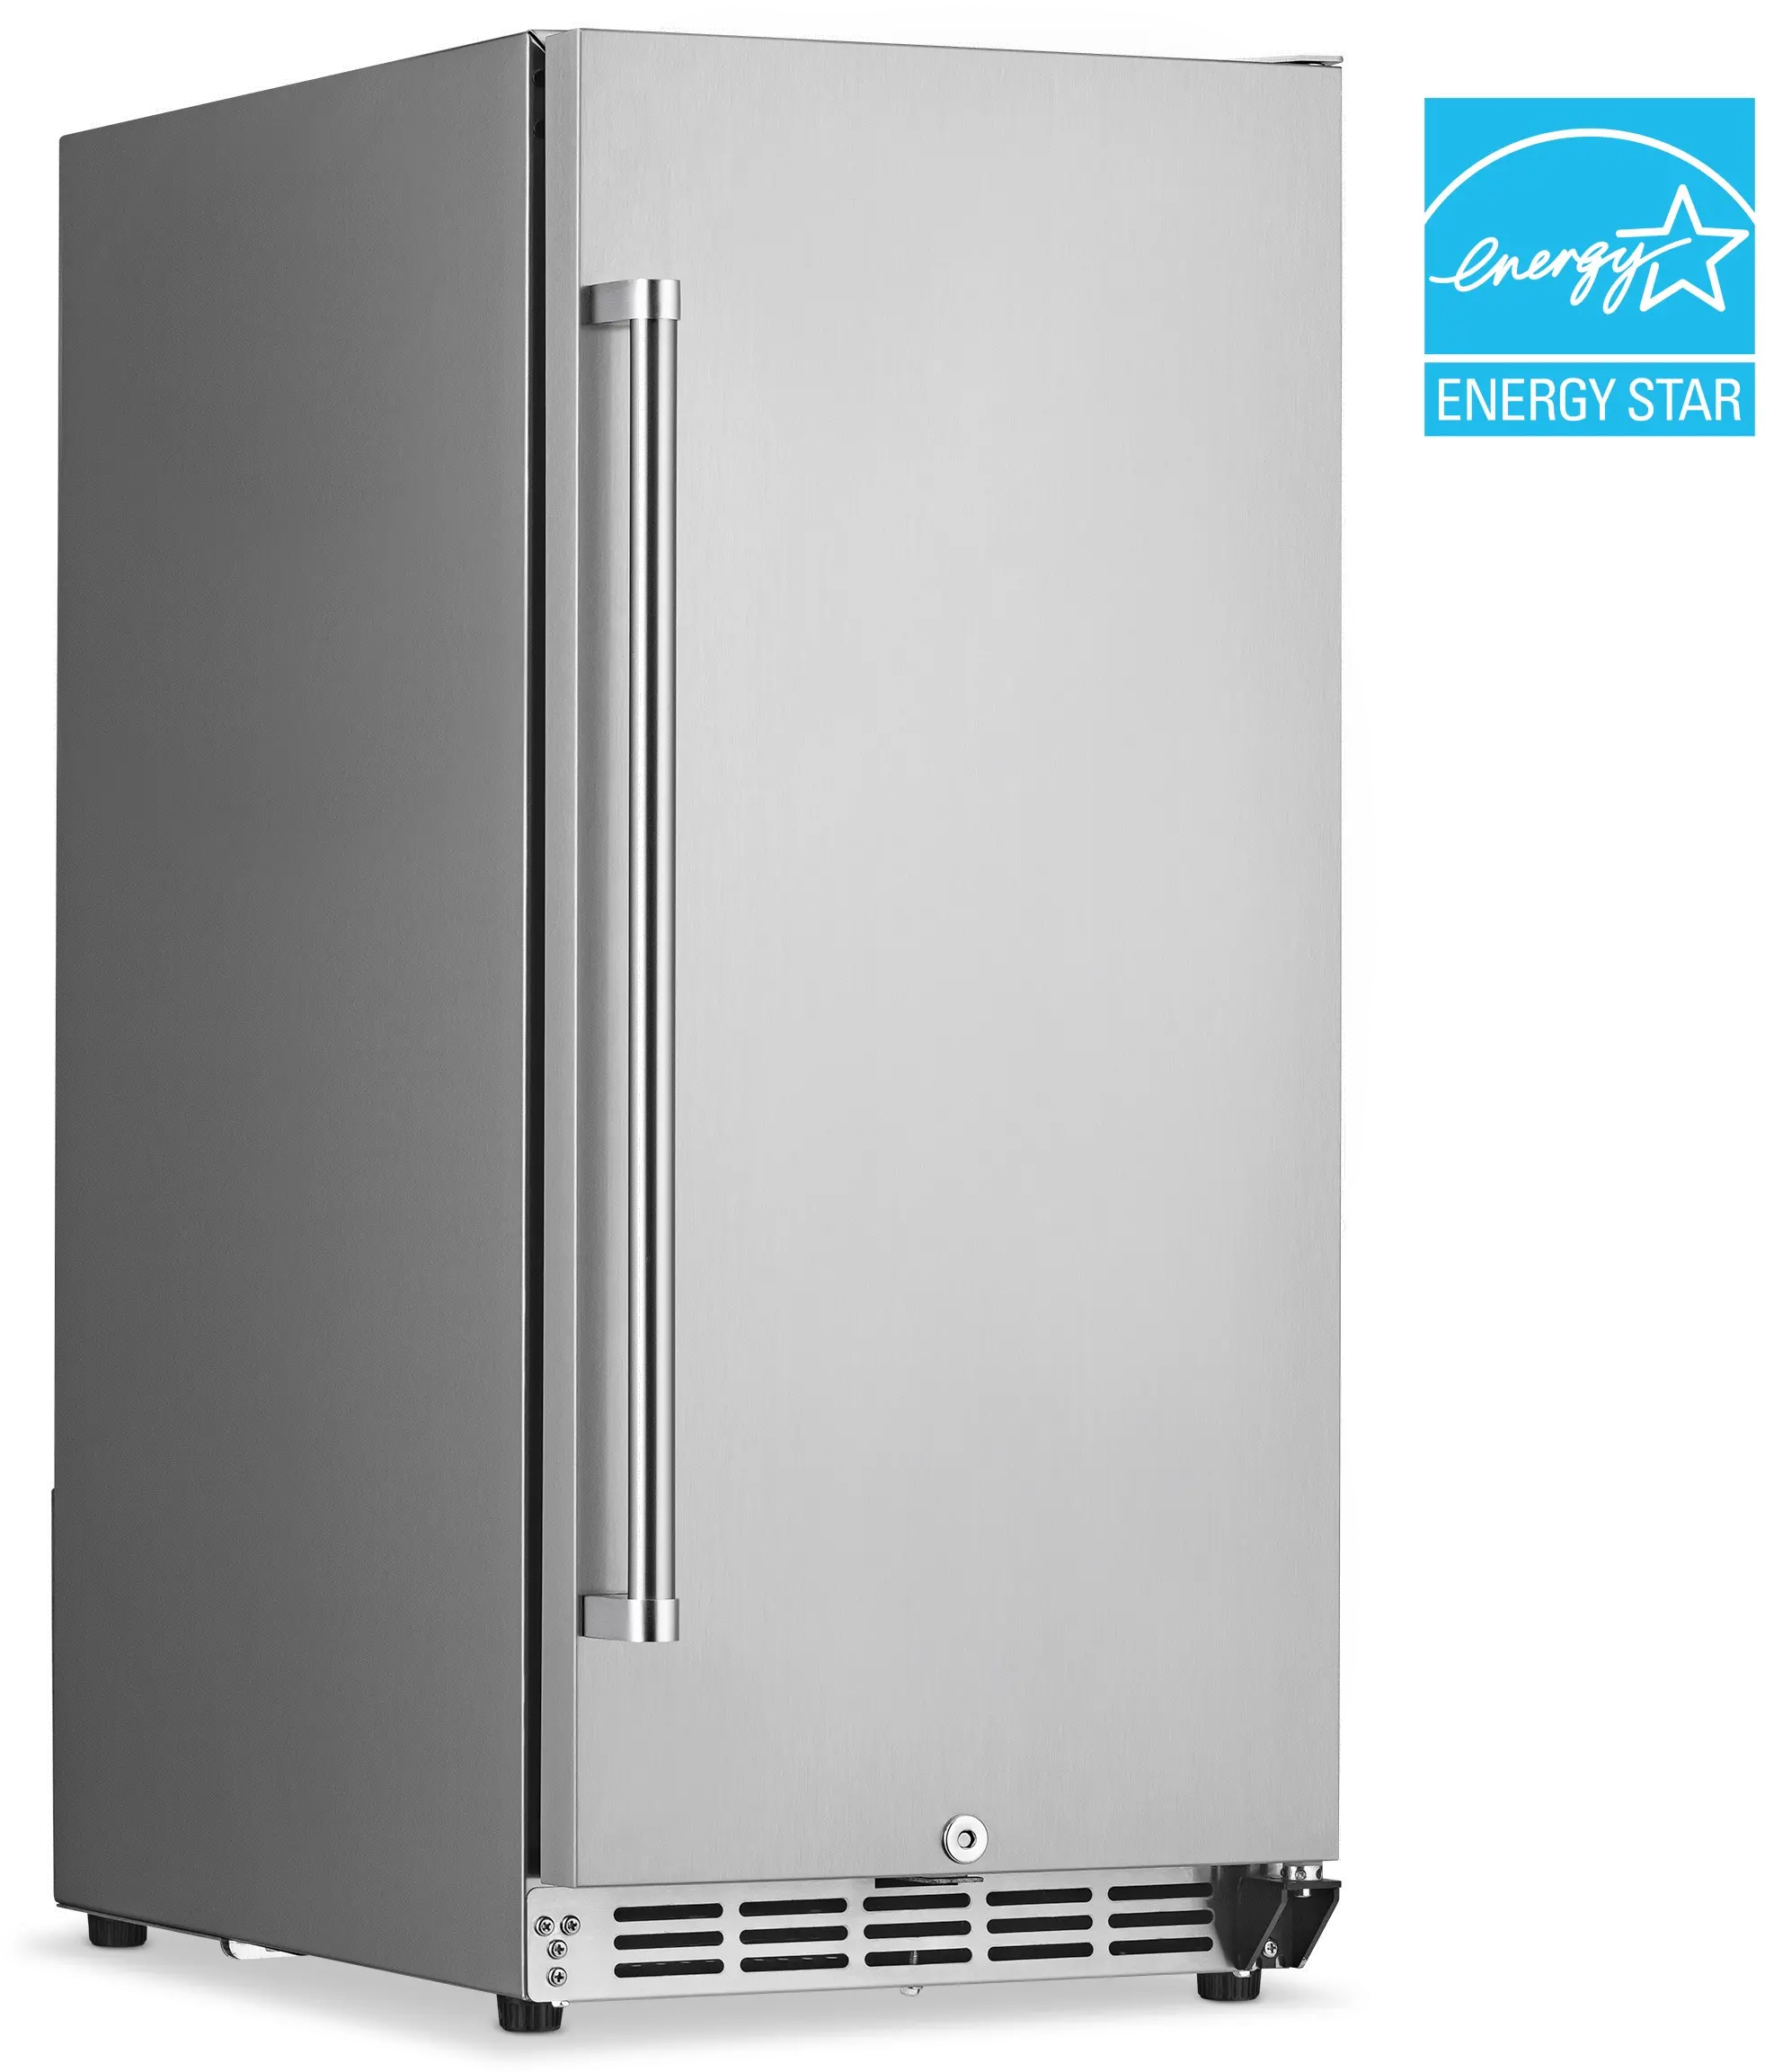 NCR032SS00 New Air 15 3.2 cu ft Built-in Beverage Refrigerato sku NCR032SS00